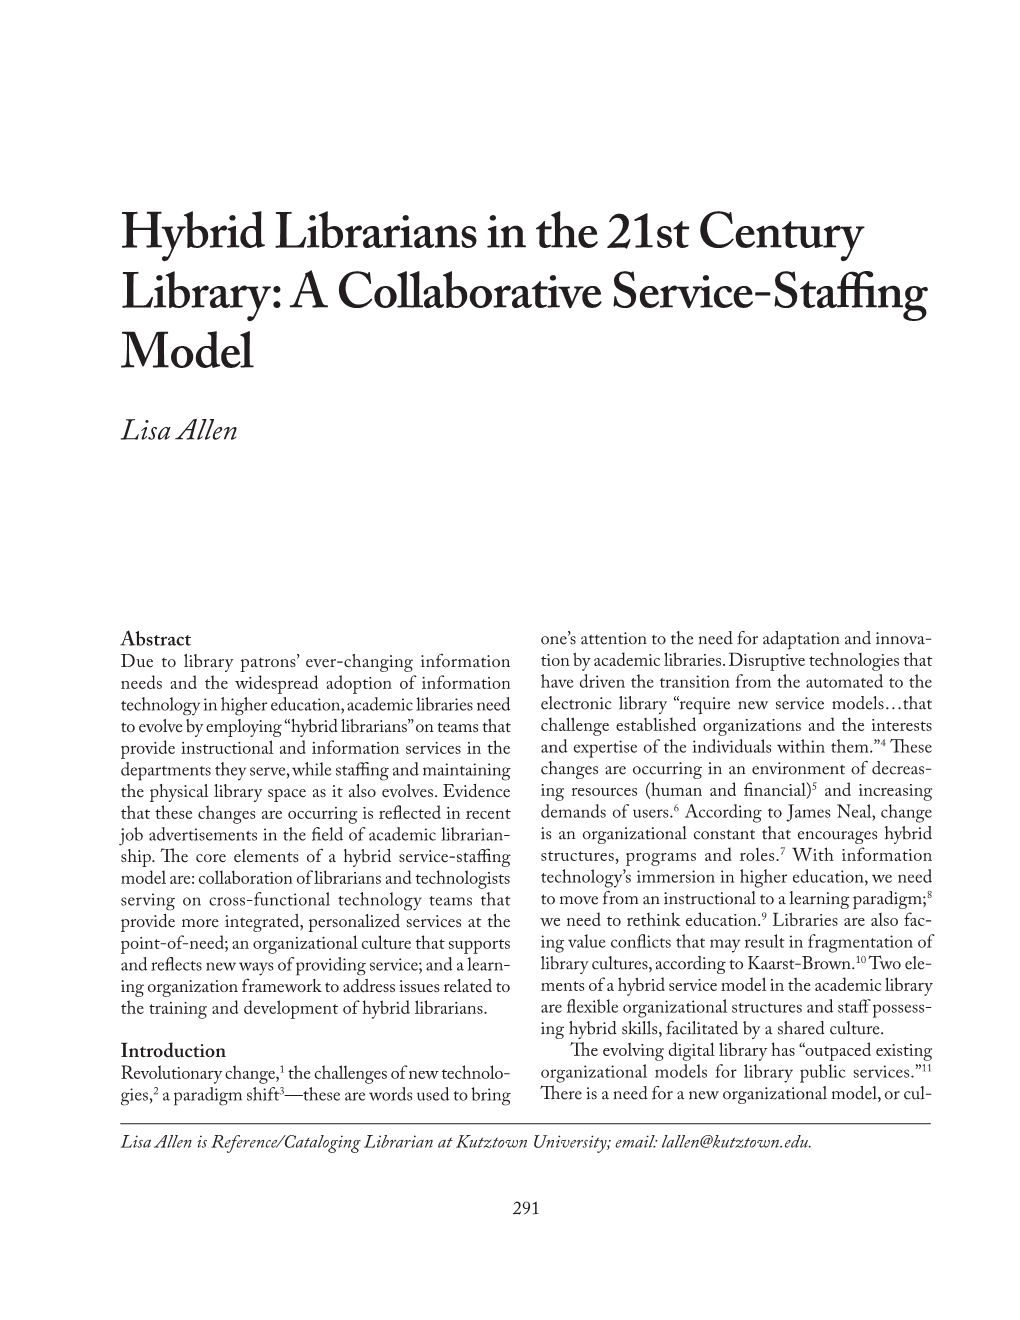 Hybrid Librarians in the 21St Century Library: a Collaborative Service-Staﬃng Model Lisa Allen